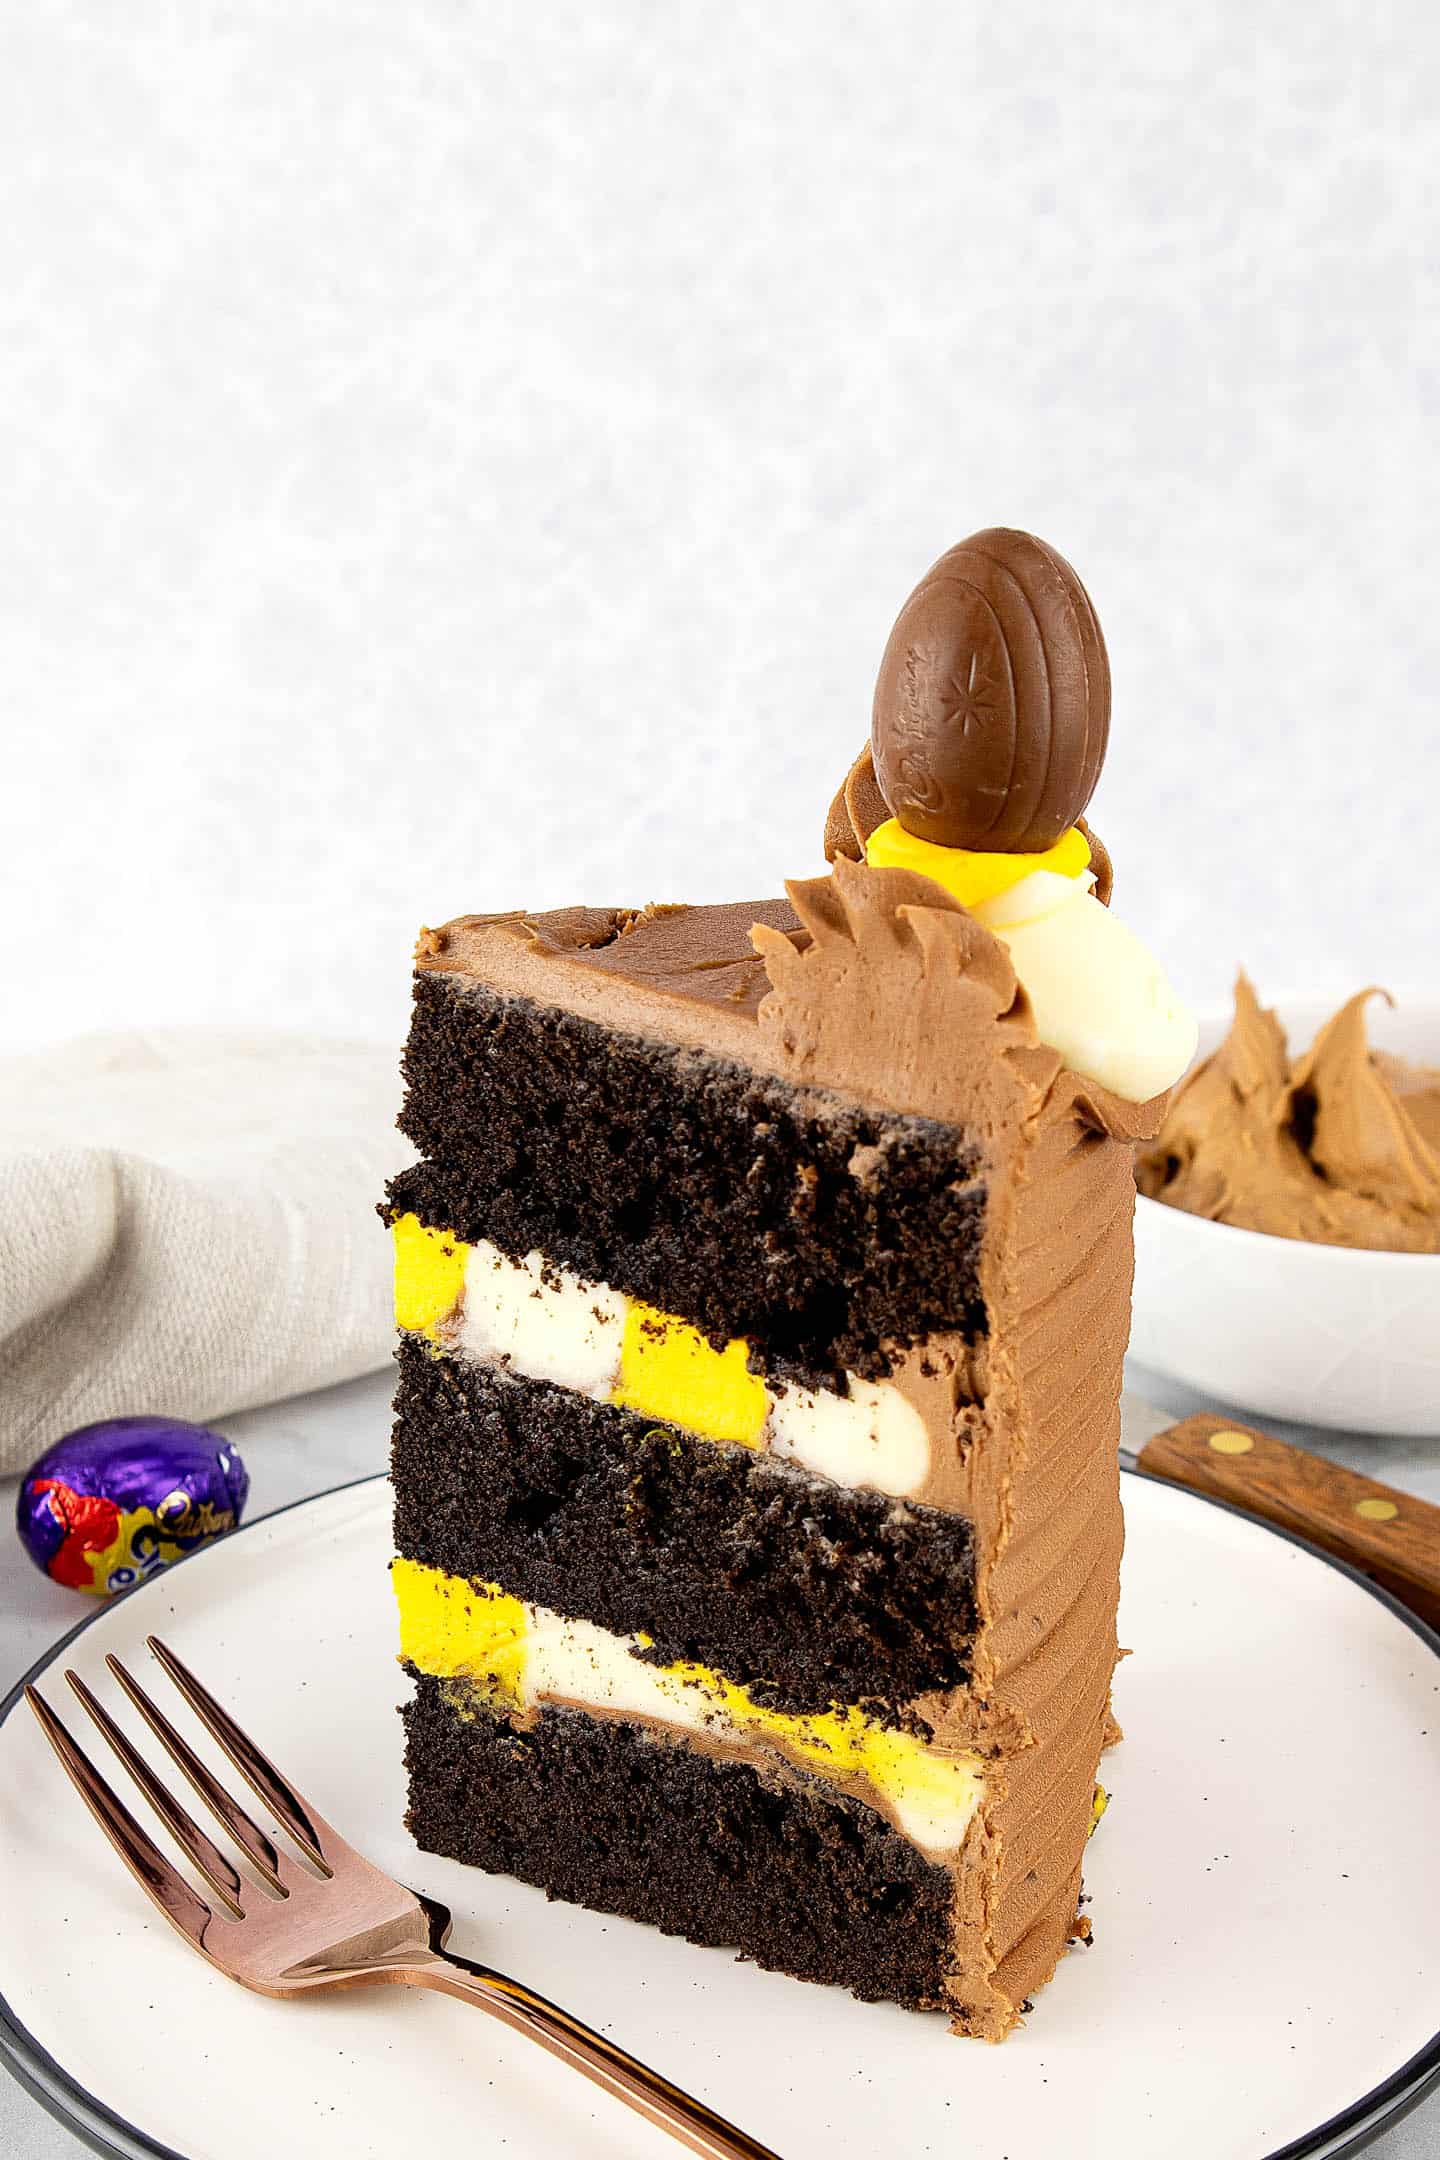 Slice of Creme Egg cake filled with yellow and white vanilla buttercream